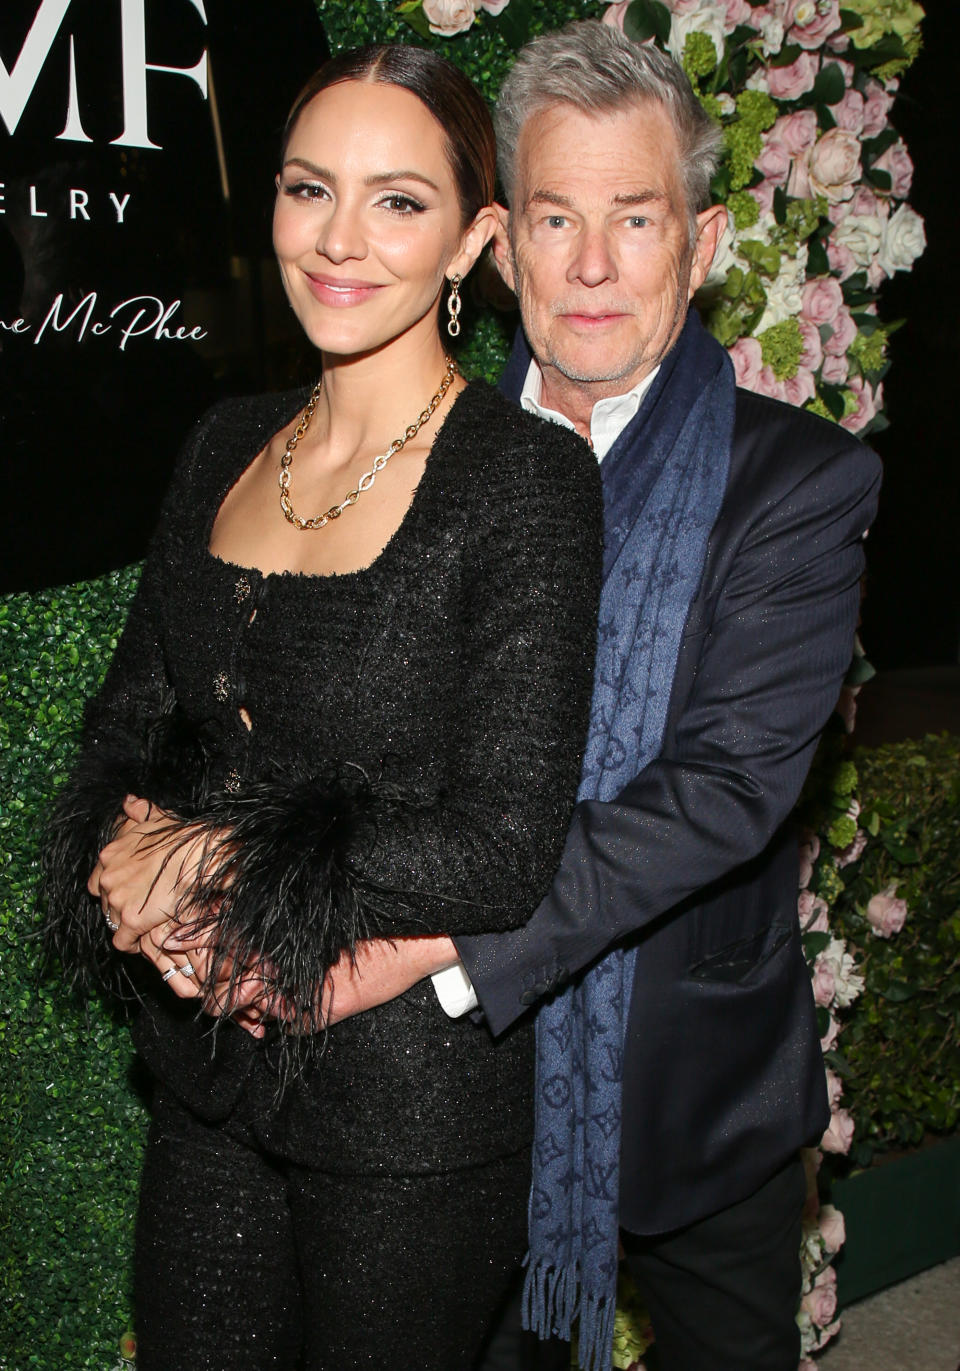 Stock picture of David Foster and his wife Katherine McPhee who welcomed a son in Remmie in 2021. (Getty Images)